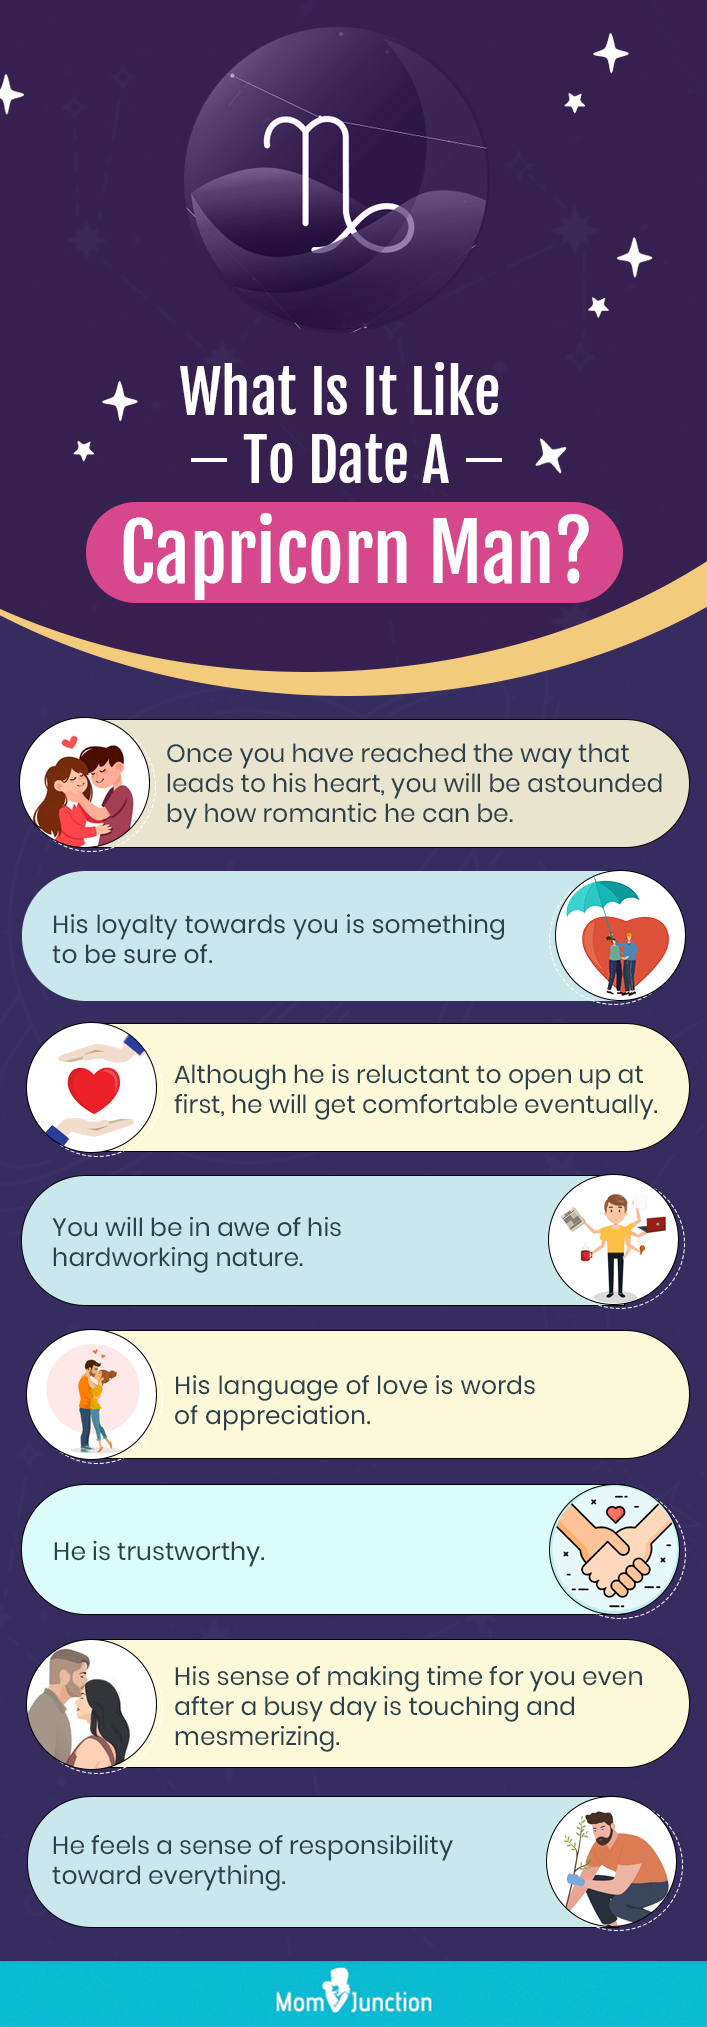 things you need to know about dating a capricorn man [infographic]